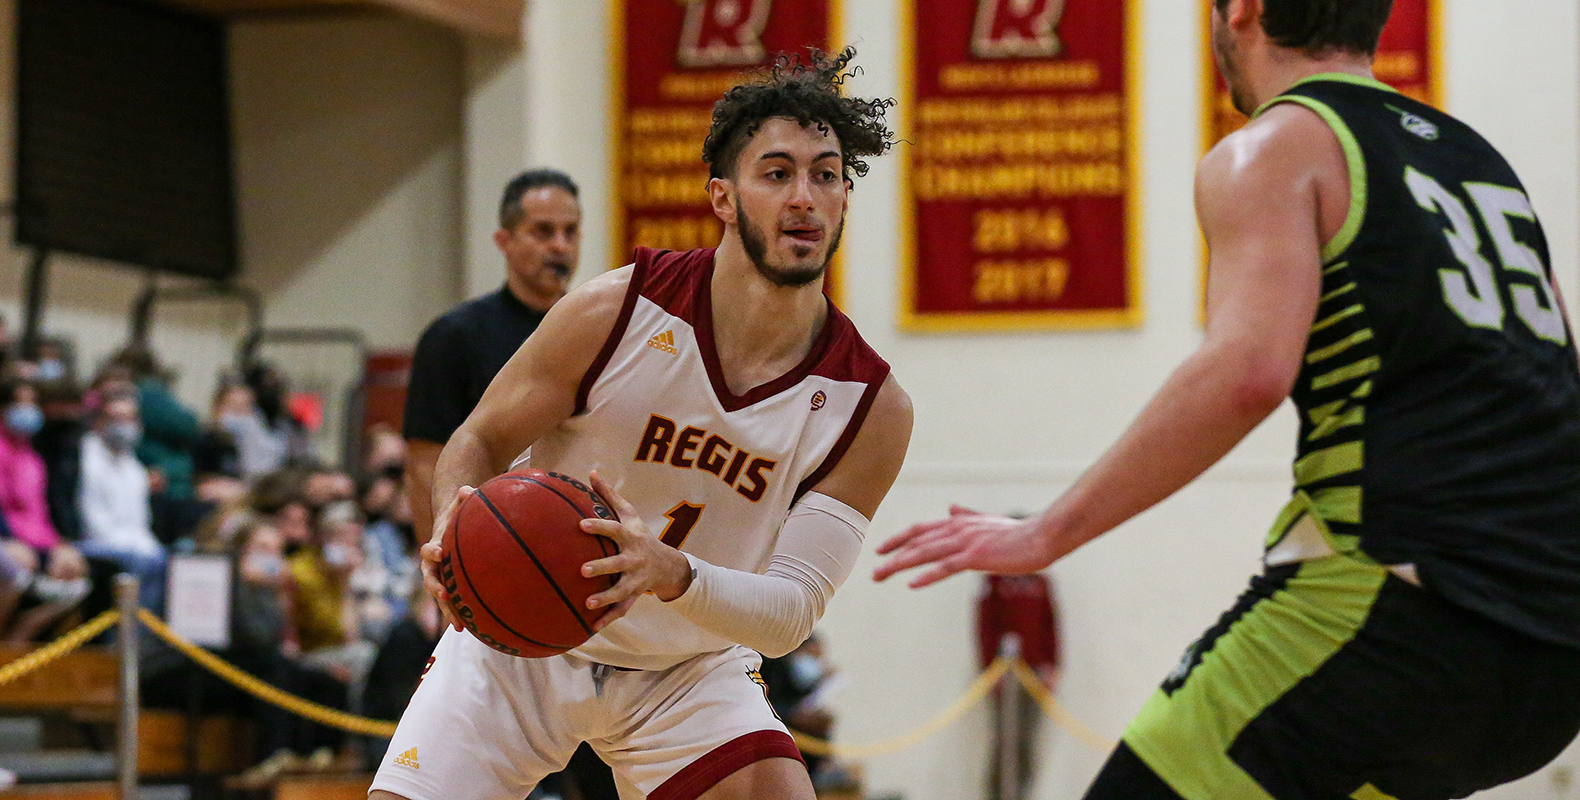 Men’s Basketball Overcomes Deficit to Defeat Johnson & Wales on Senior Night